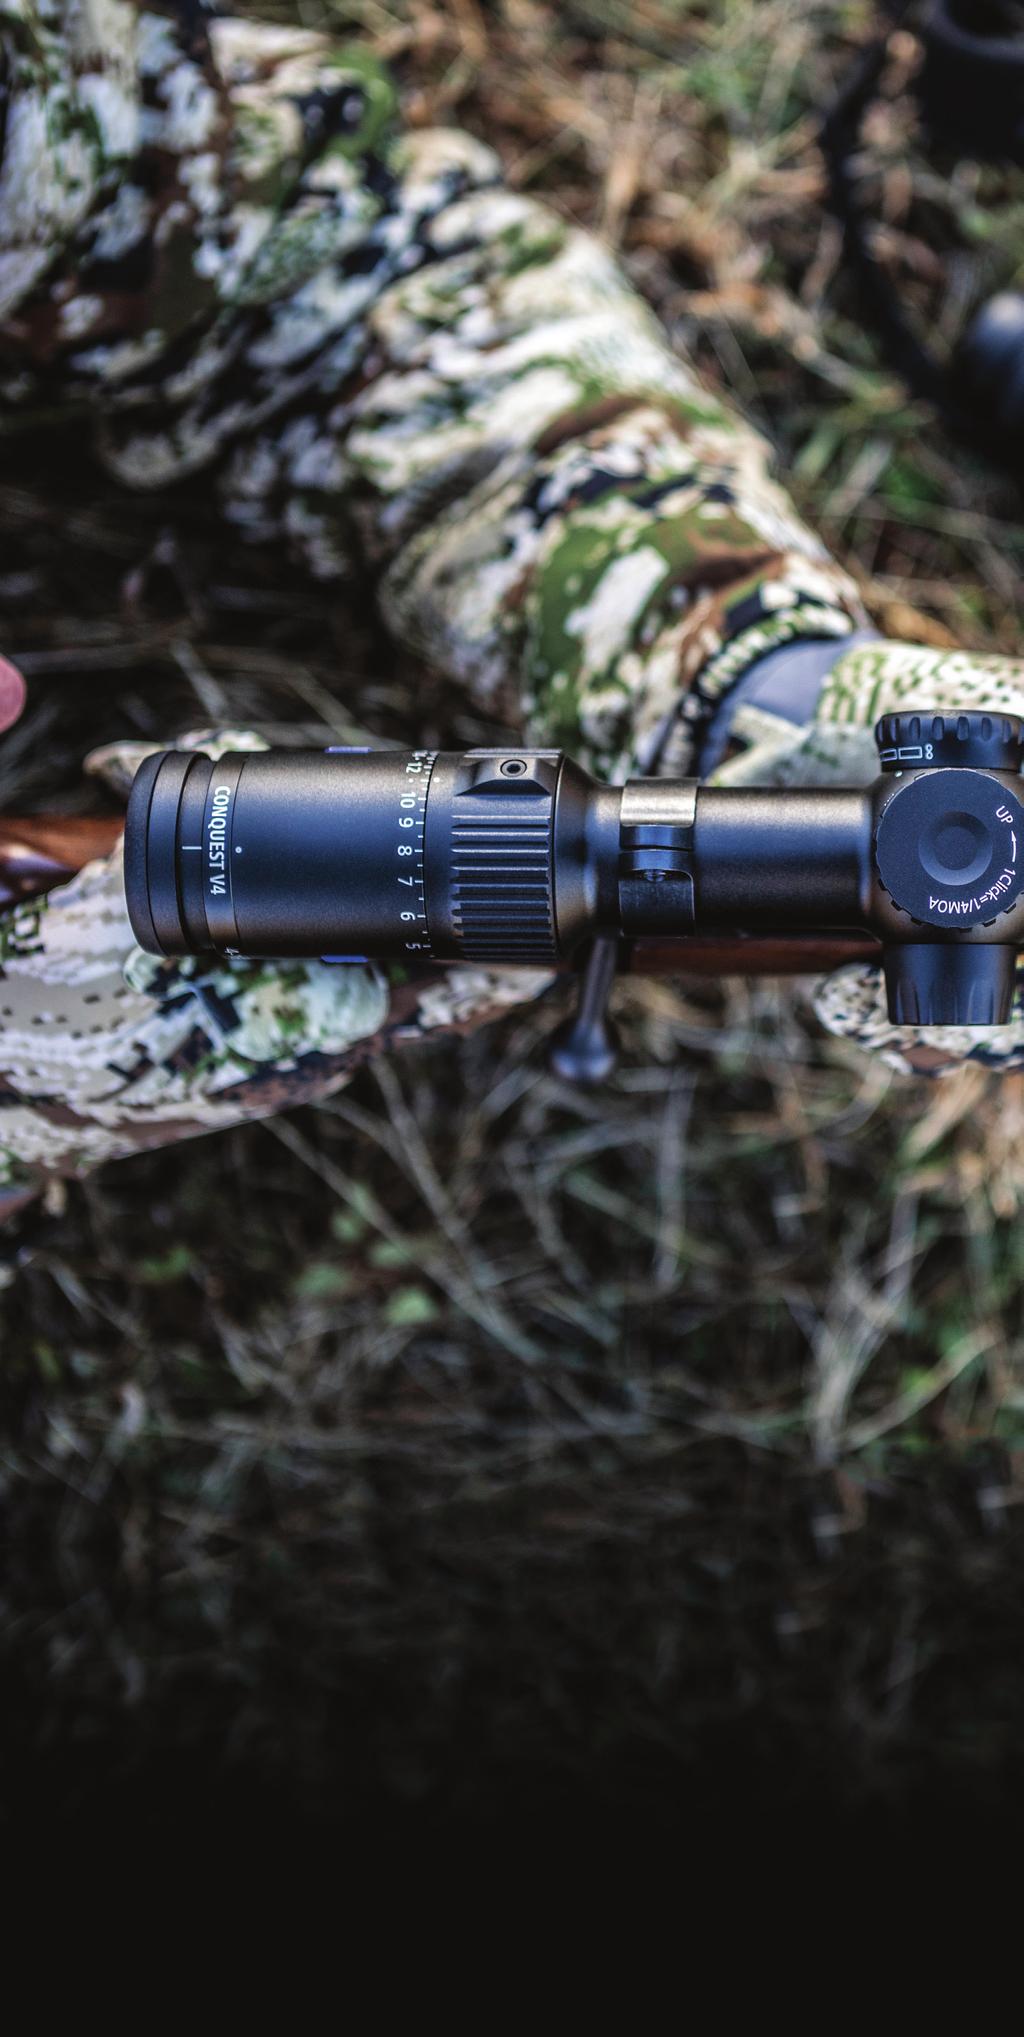 PRO U T H IG HLIG HT onquest R ET I L E O P T I O NS : ZQR Z-PLEX esigned and Engineered in Germany allistic Reticle bsolute reliability: the mechanical systems stand the test of harsh recoil,